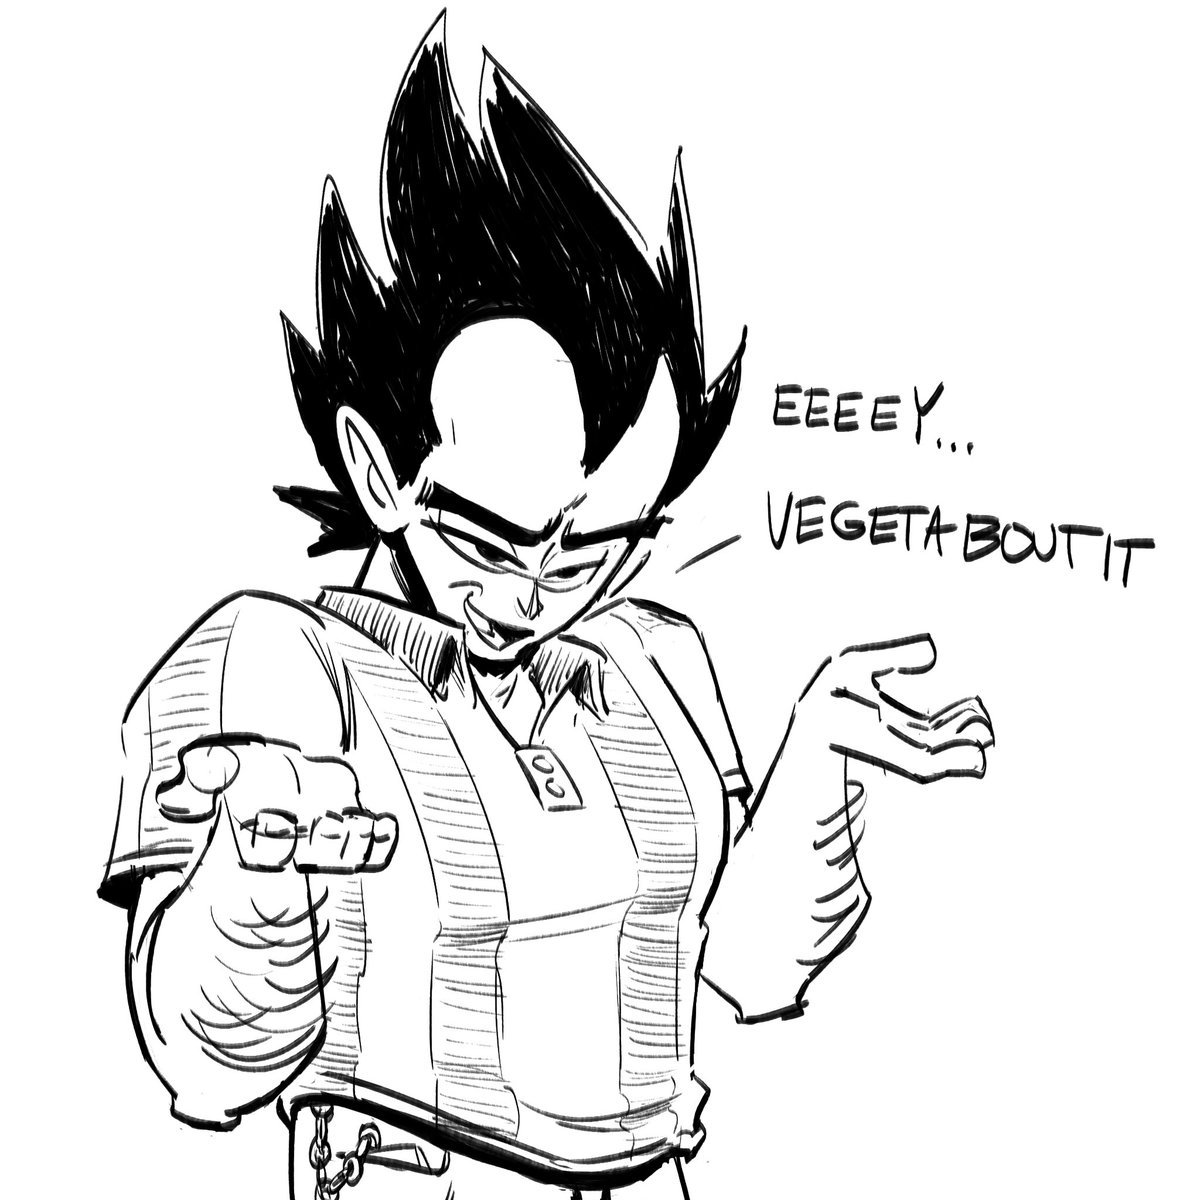 Yes, I know that's not how you pronounce Vegeta, and no, I don't care, it makes me laugh 